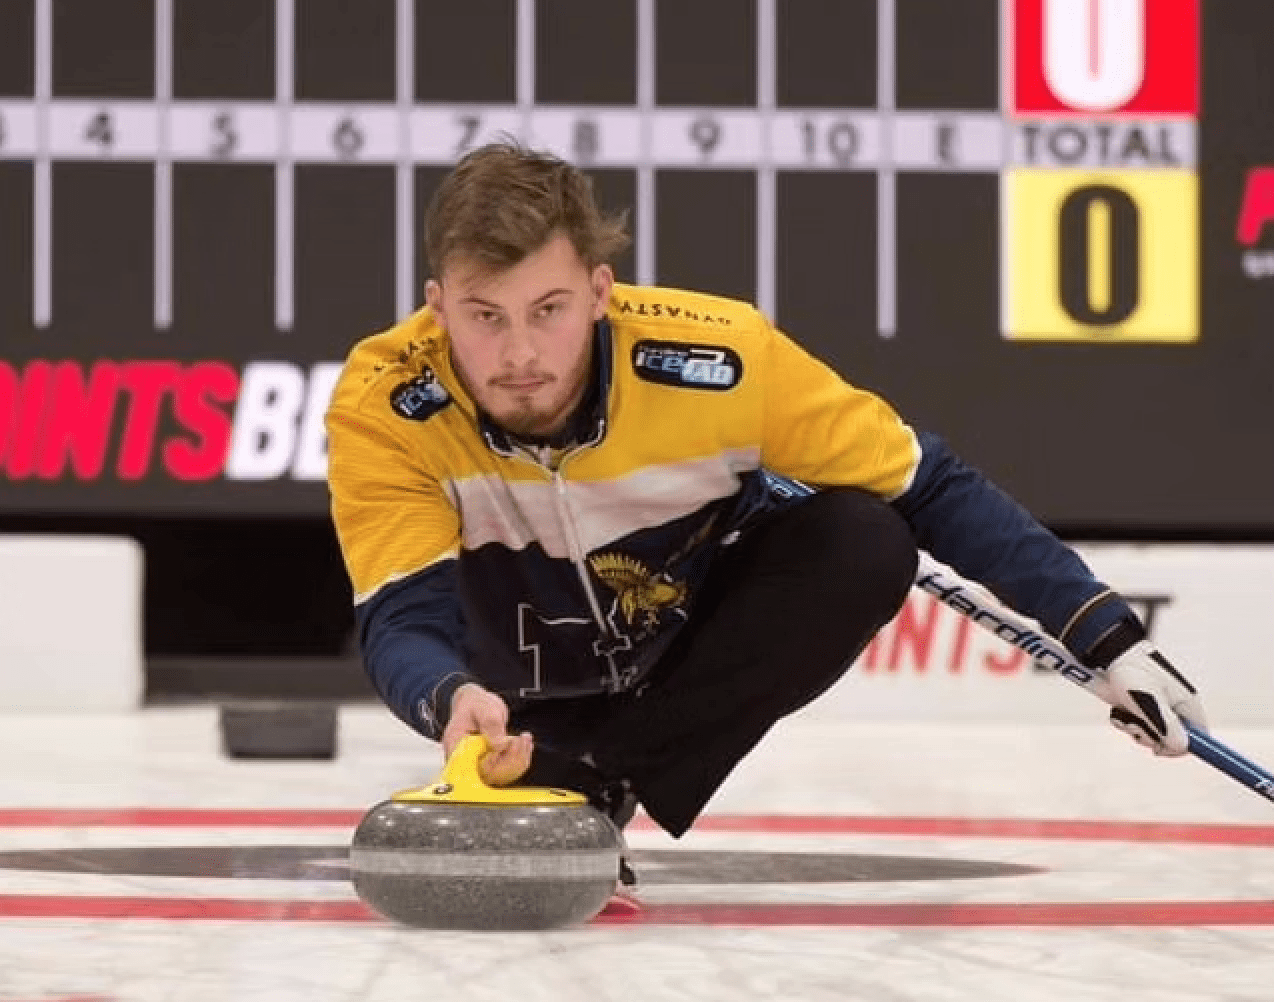 A curler prepares to send a rock down the rink.